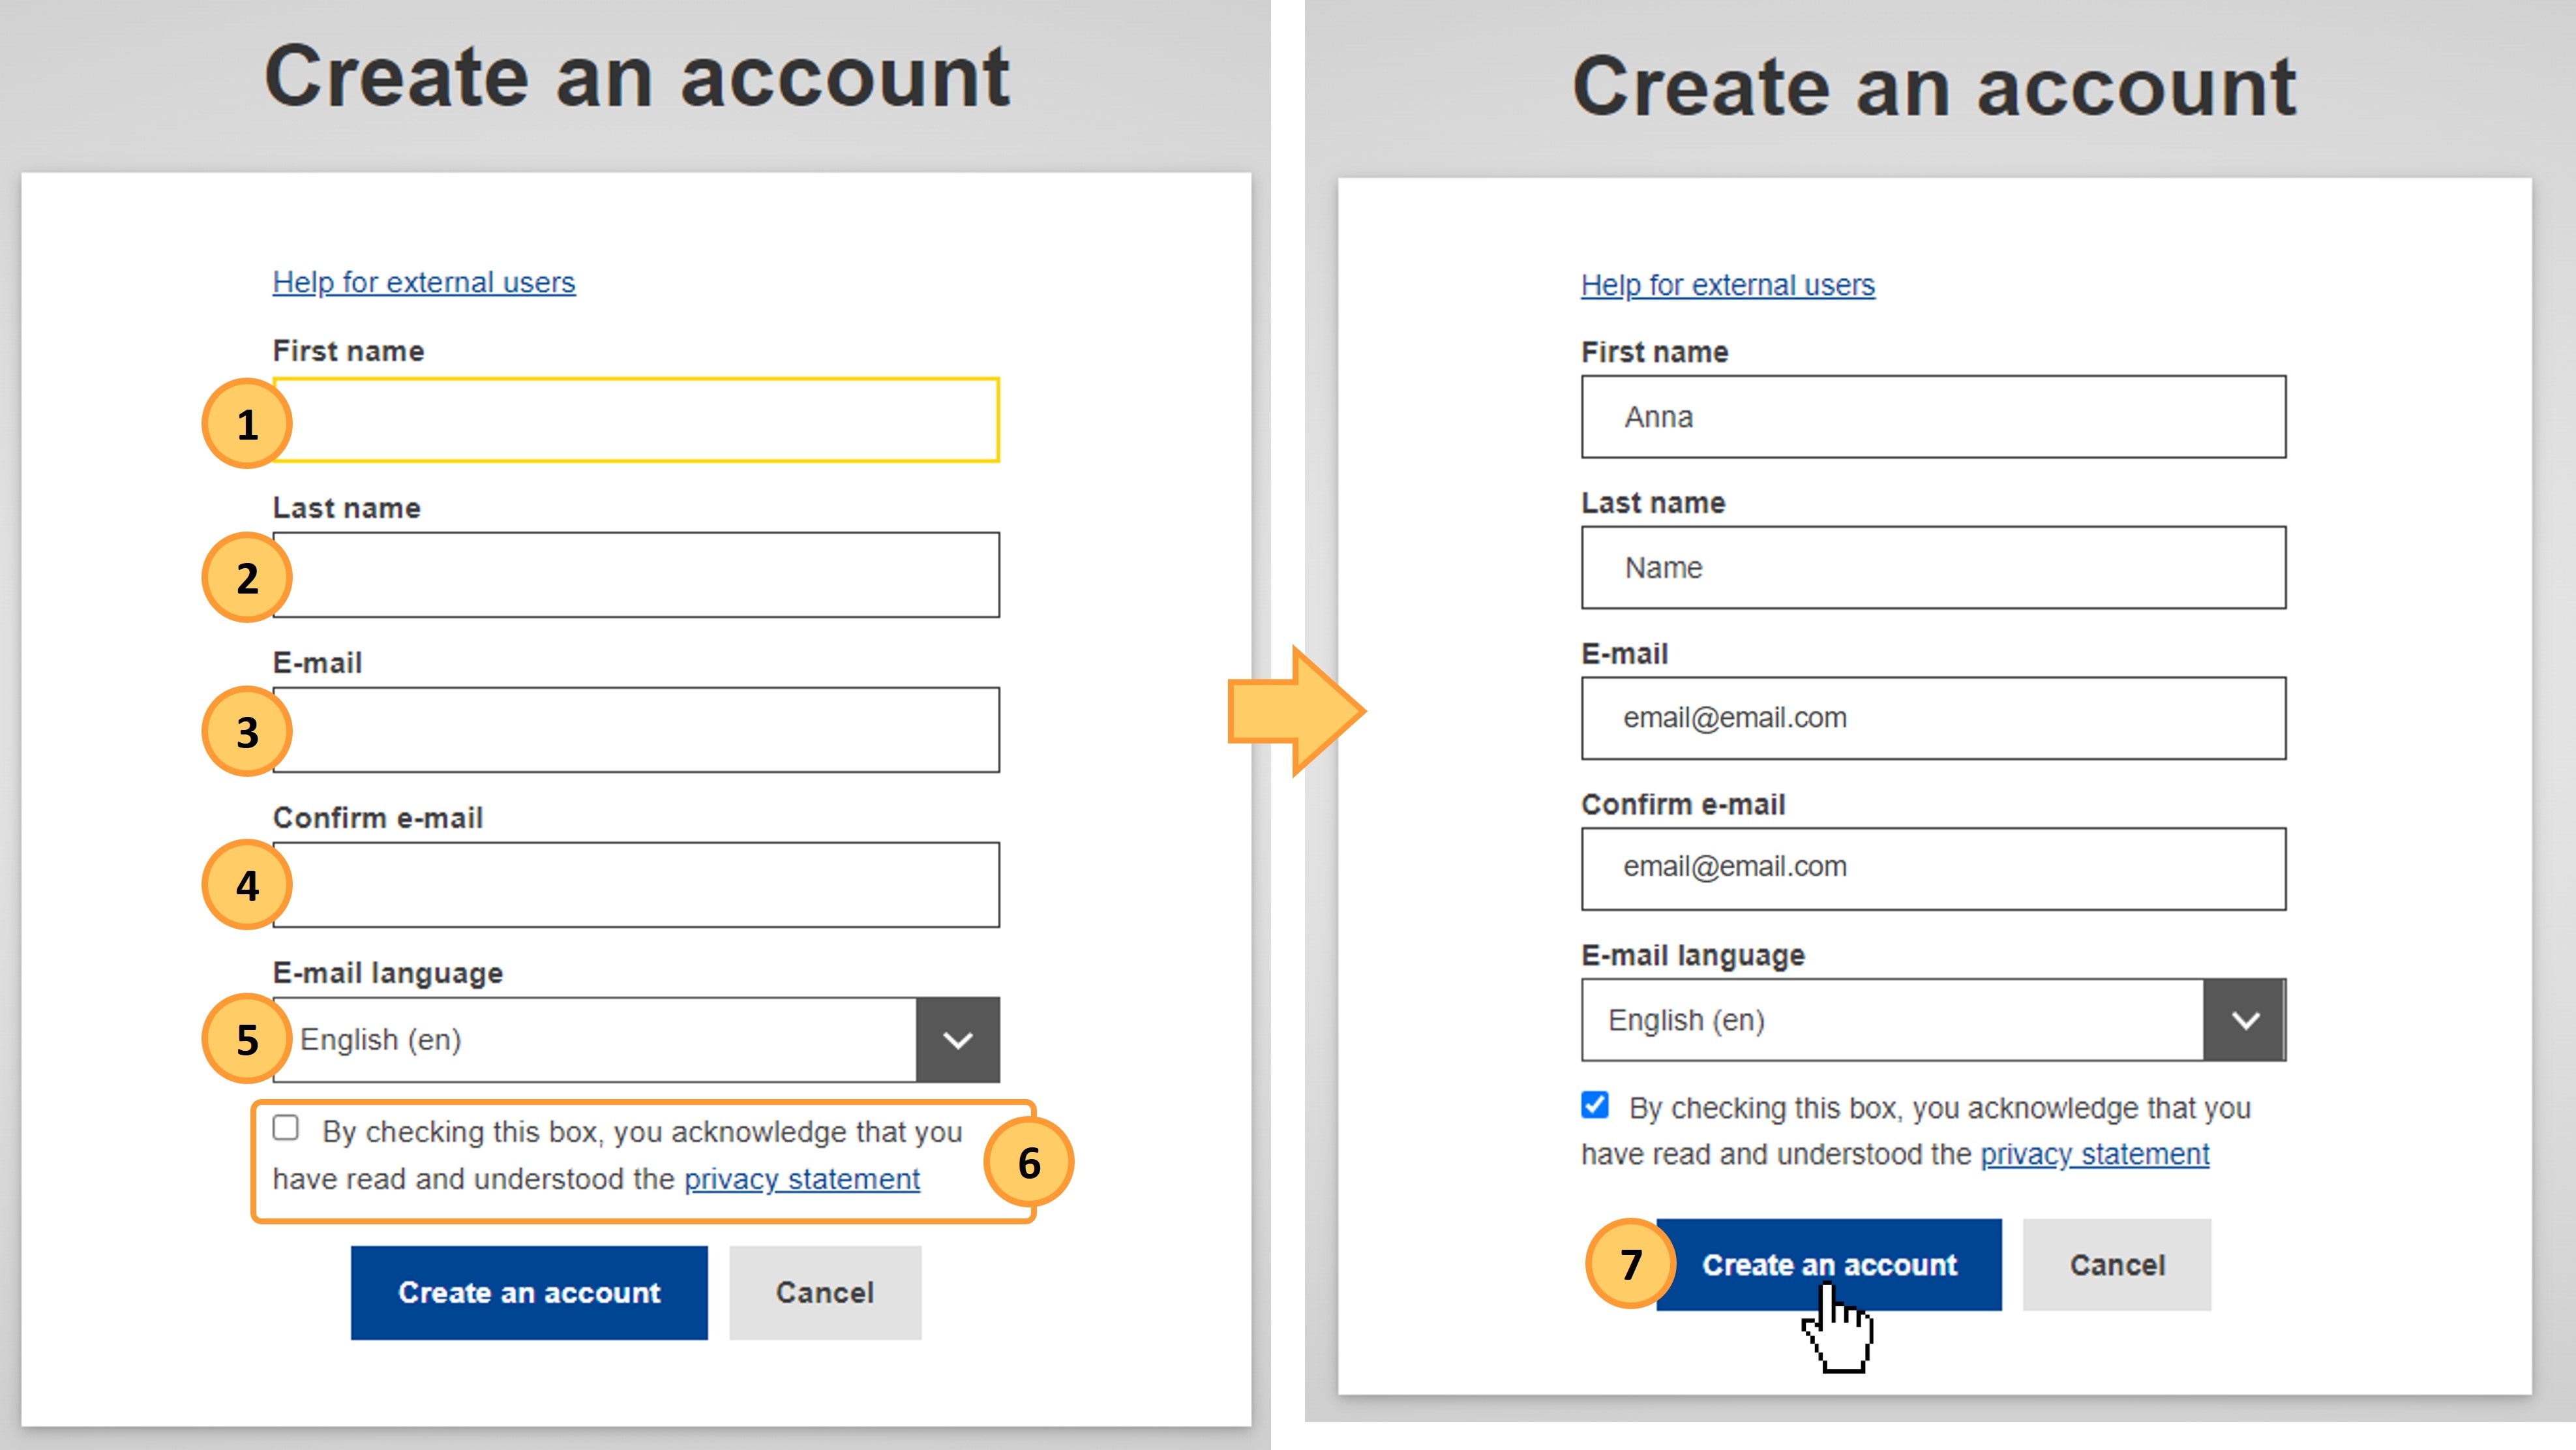 Sign in to EU Login with email and password